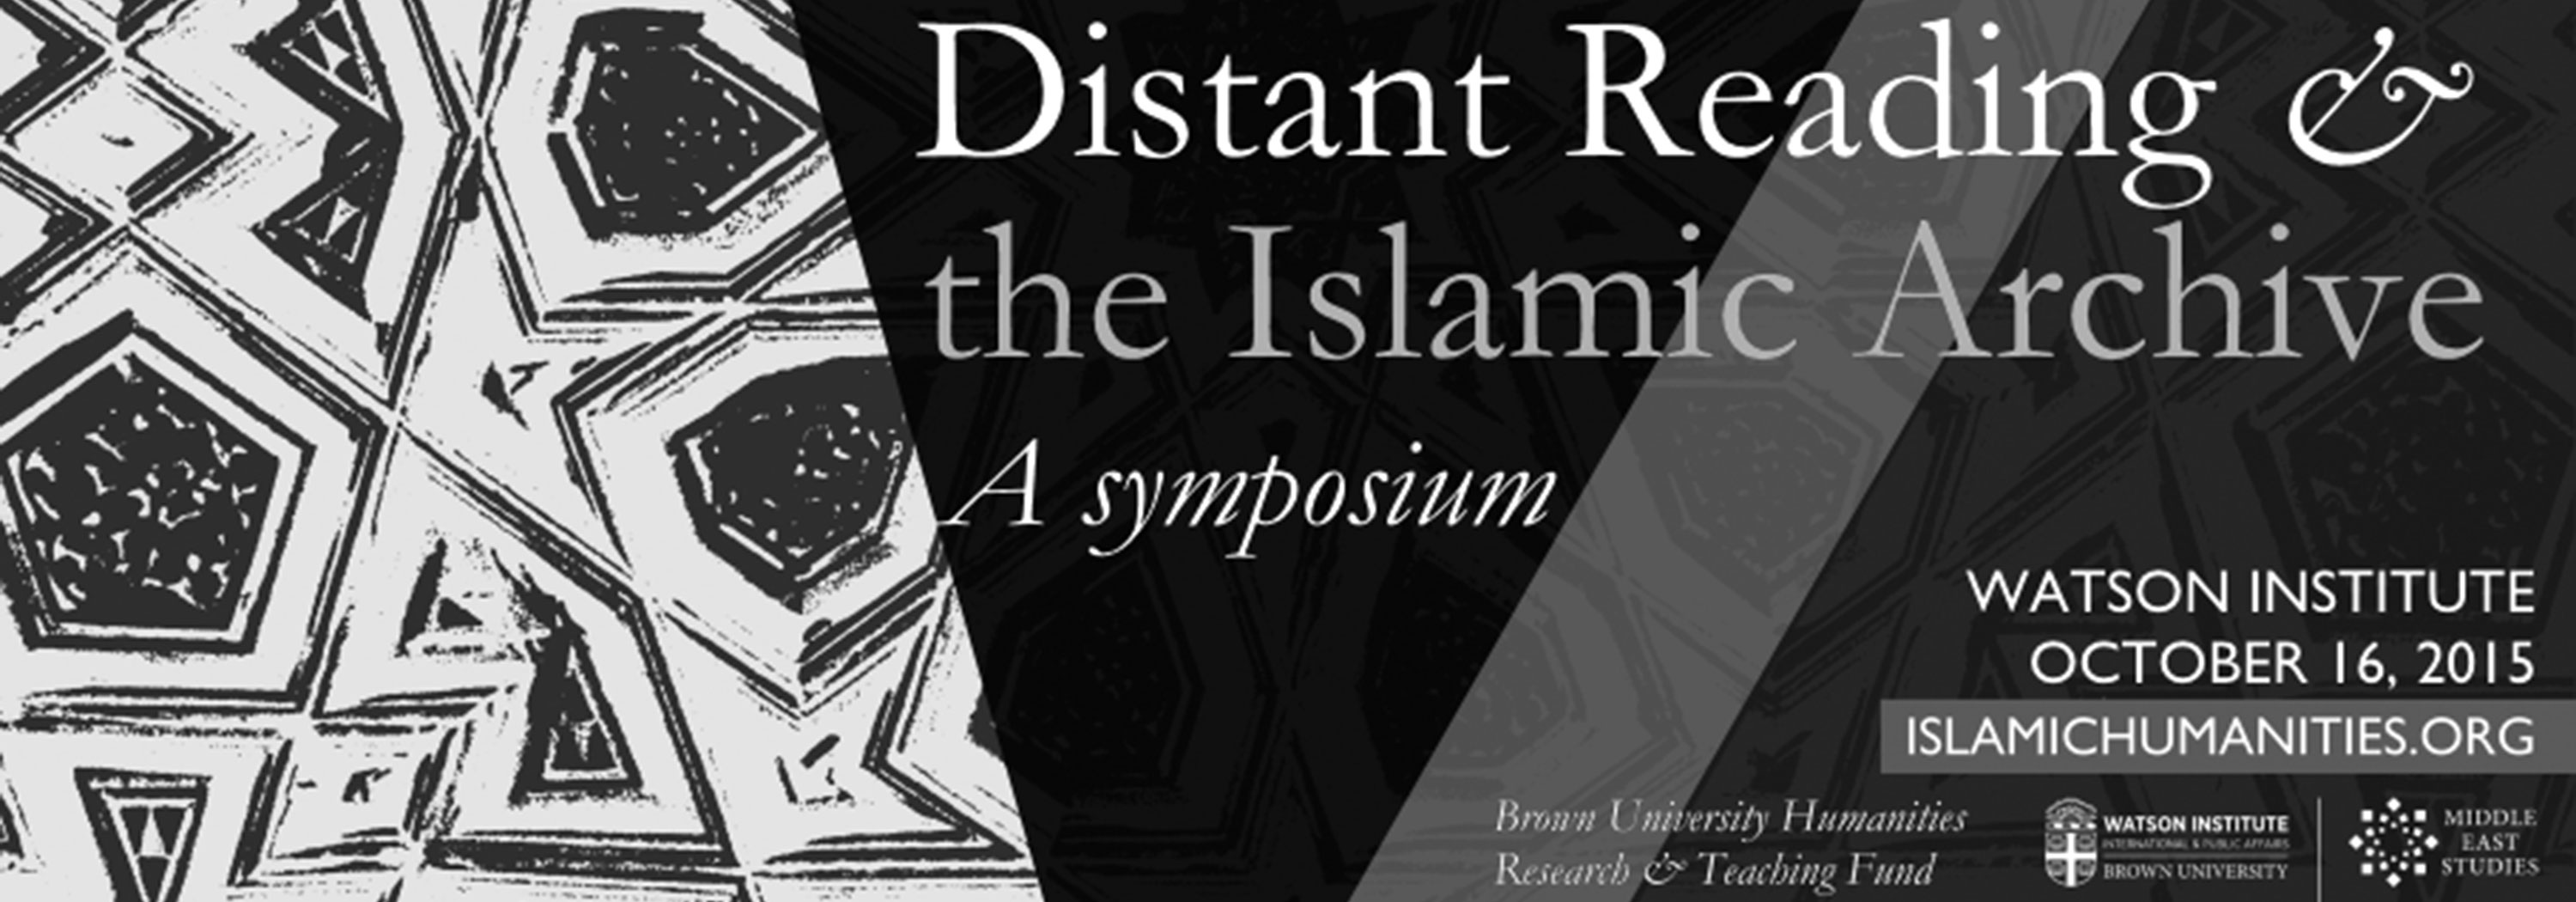 Distant Reading & the Islamic Archive